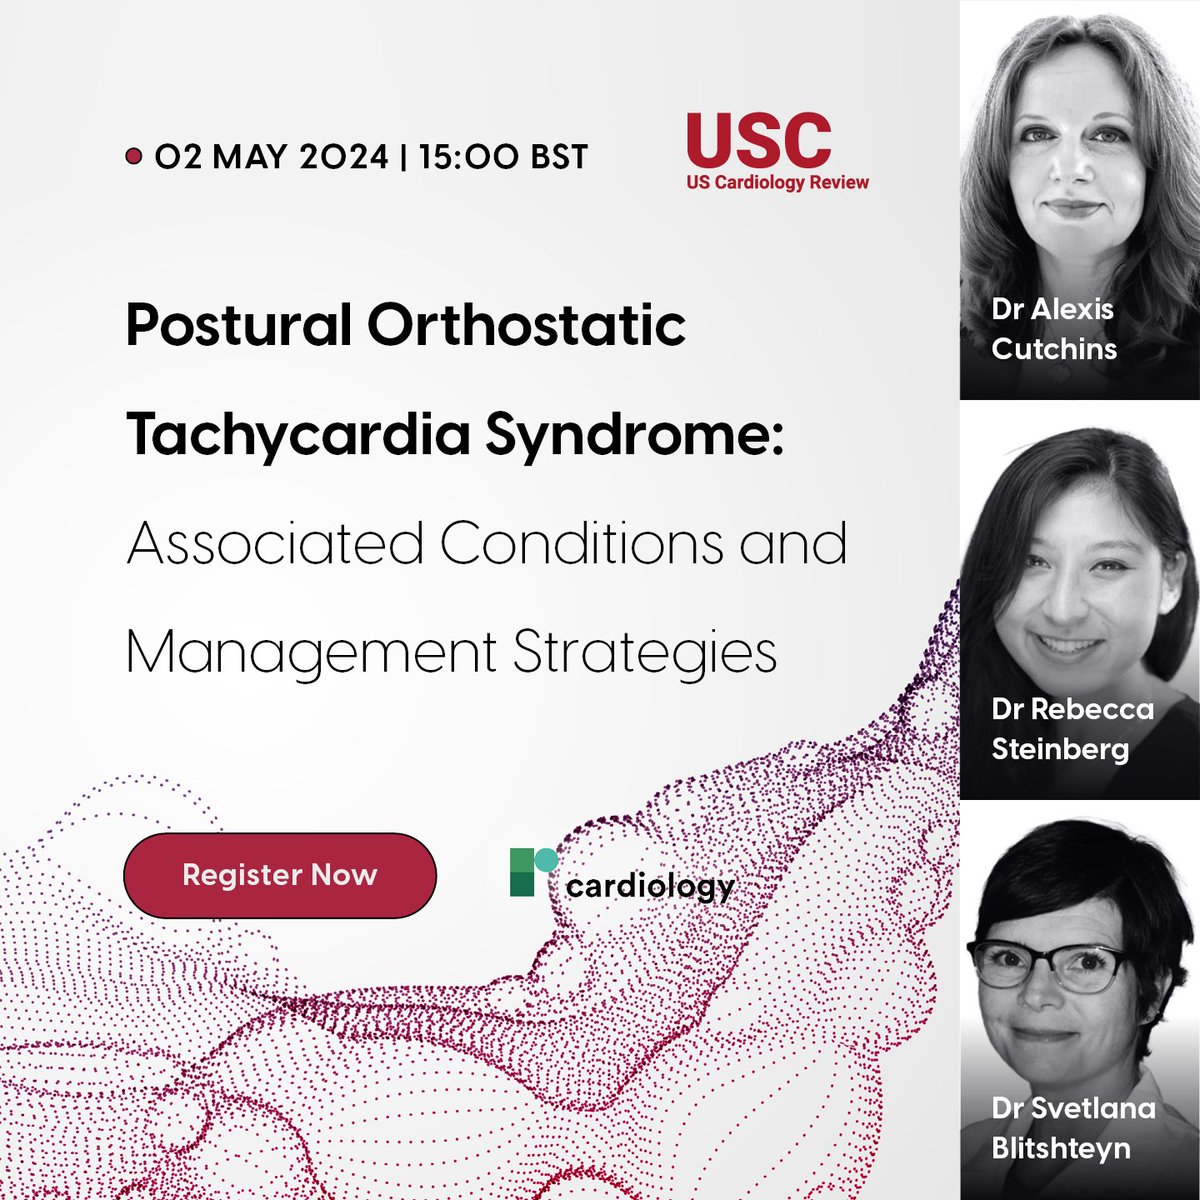 Join us on May 2 for an insightful discussion on Postural Orthostatic Tachycardia Syndrome with Dr Steinberg, Dr Blitshteyn and Dr Cutchins. Learn about diagnosis, symptoms, pathology, and novel treatment strategies. 👉 ow.ly/2wQm50ReTki #POTS #CardioEd #CardioTwitter